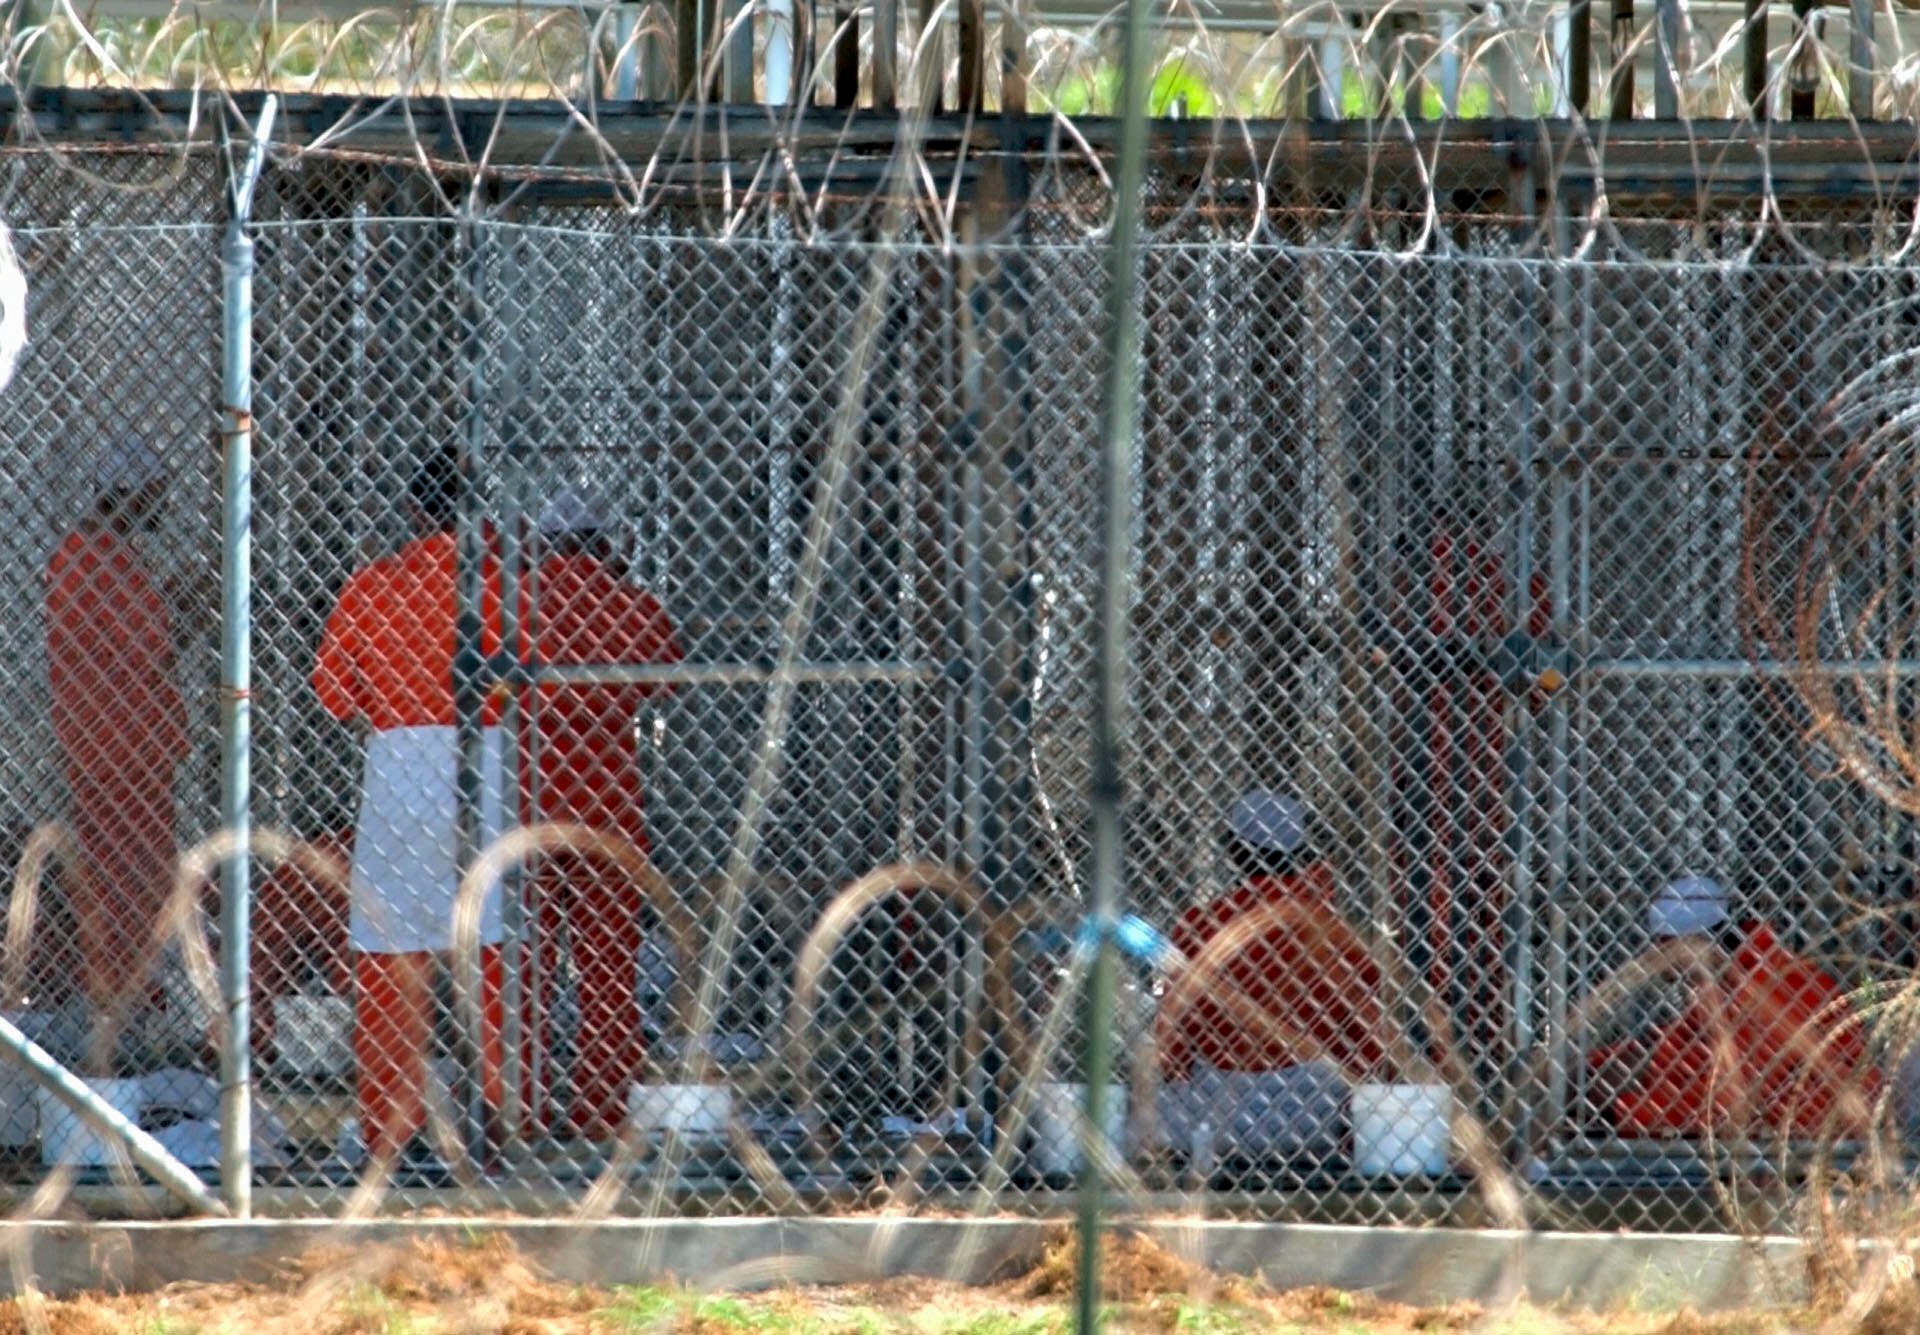 Guantanamo Bay prisoners show signs of ‘accelerated ageing’: ICRC